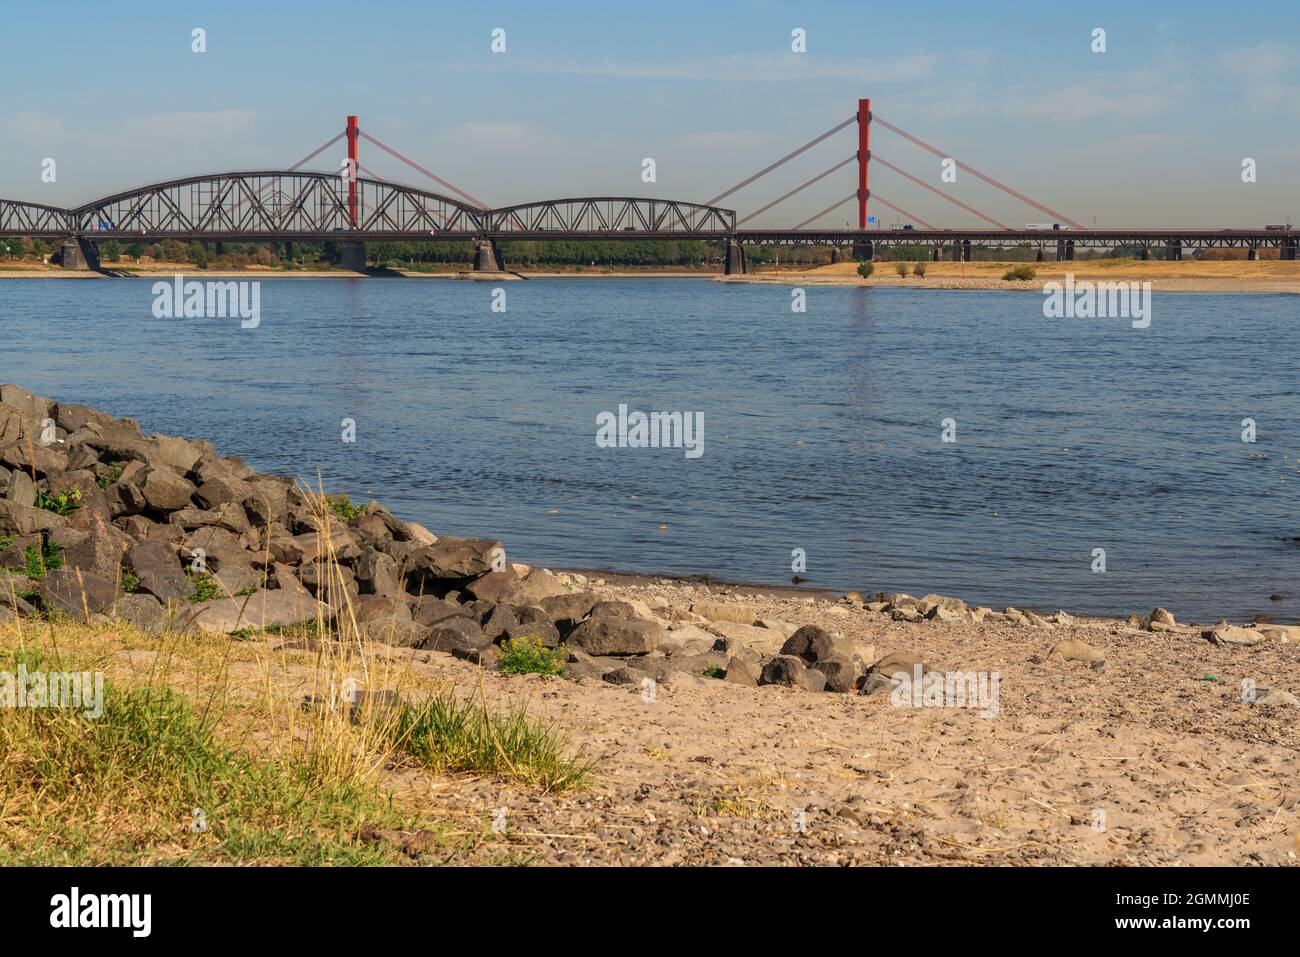 Duisburg, North Rhine-Westfalia, Germany - August 07, 2018: A parched meadow at the River Rhine with the Beeckerwerther Bridge and the Haus-Knipp Rail Stock Photo